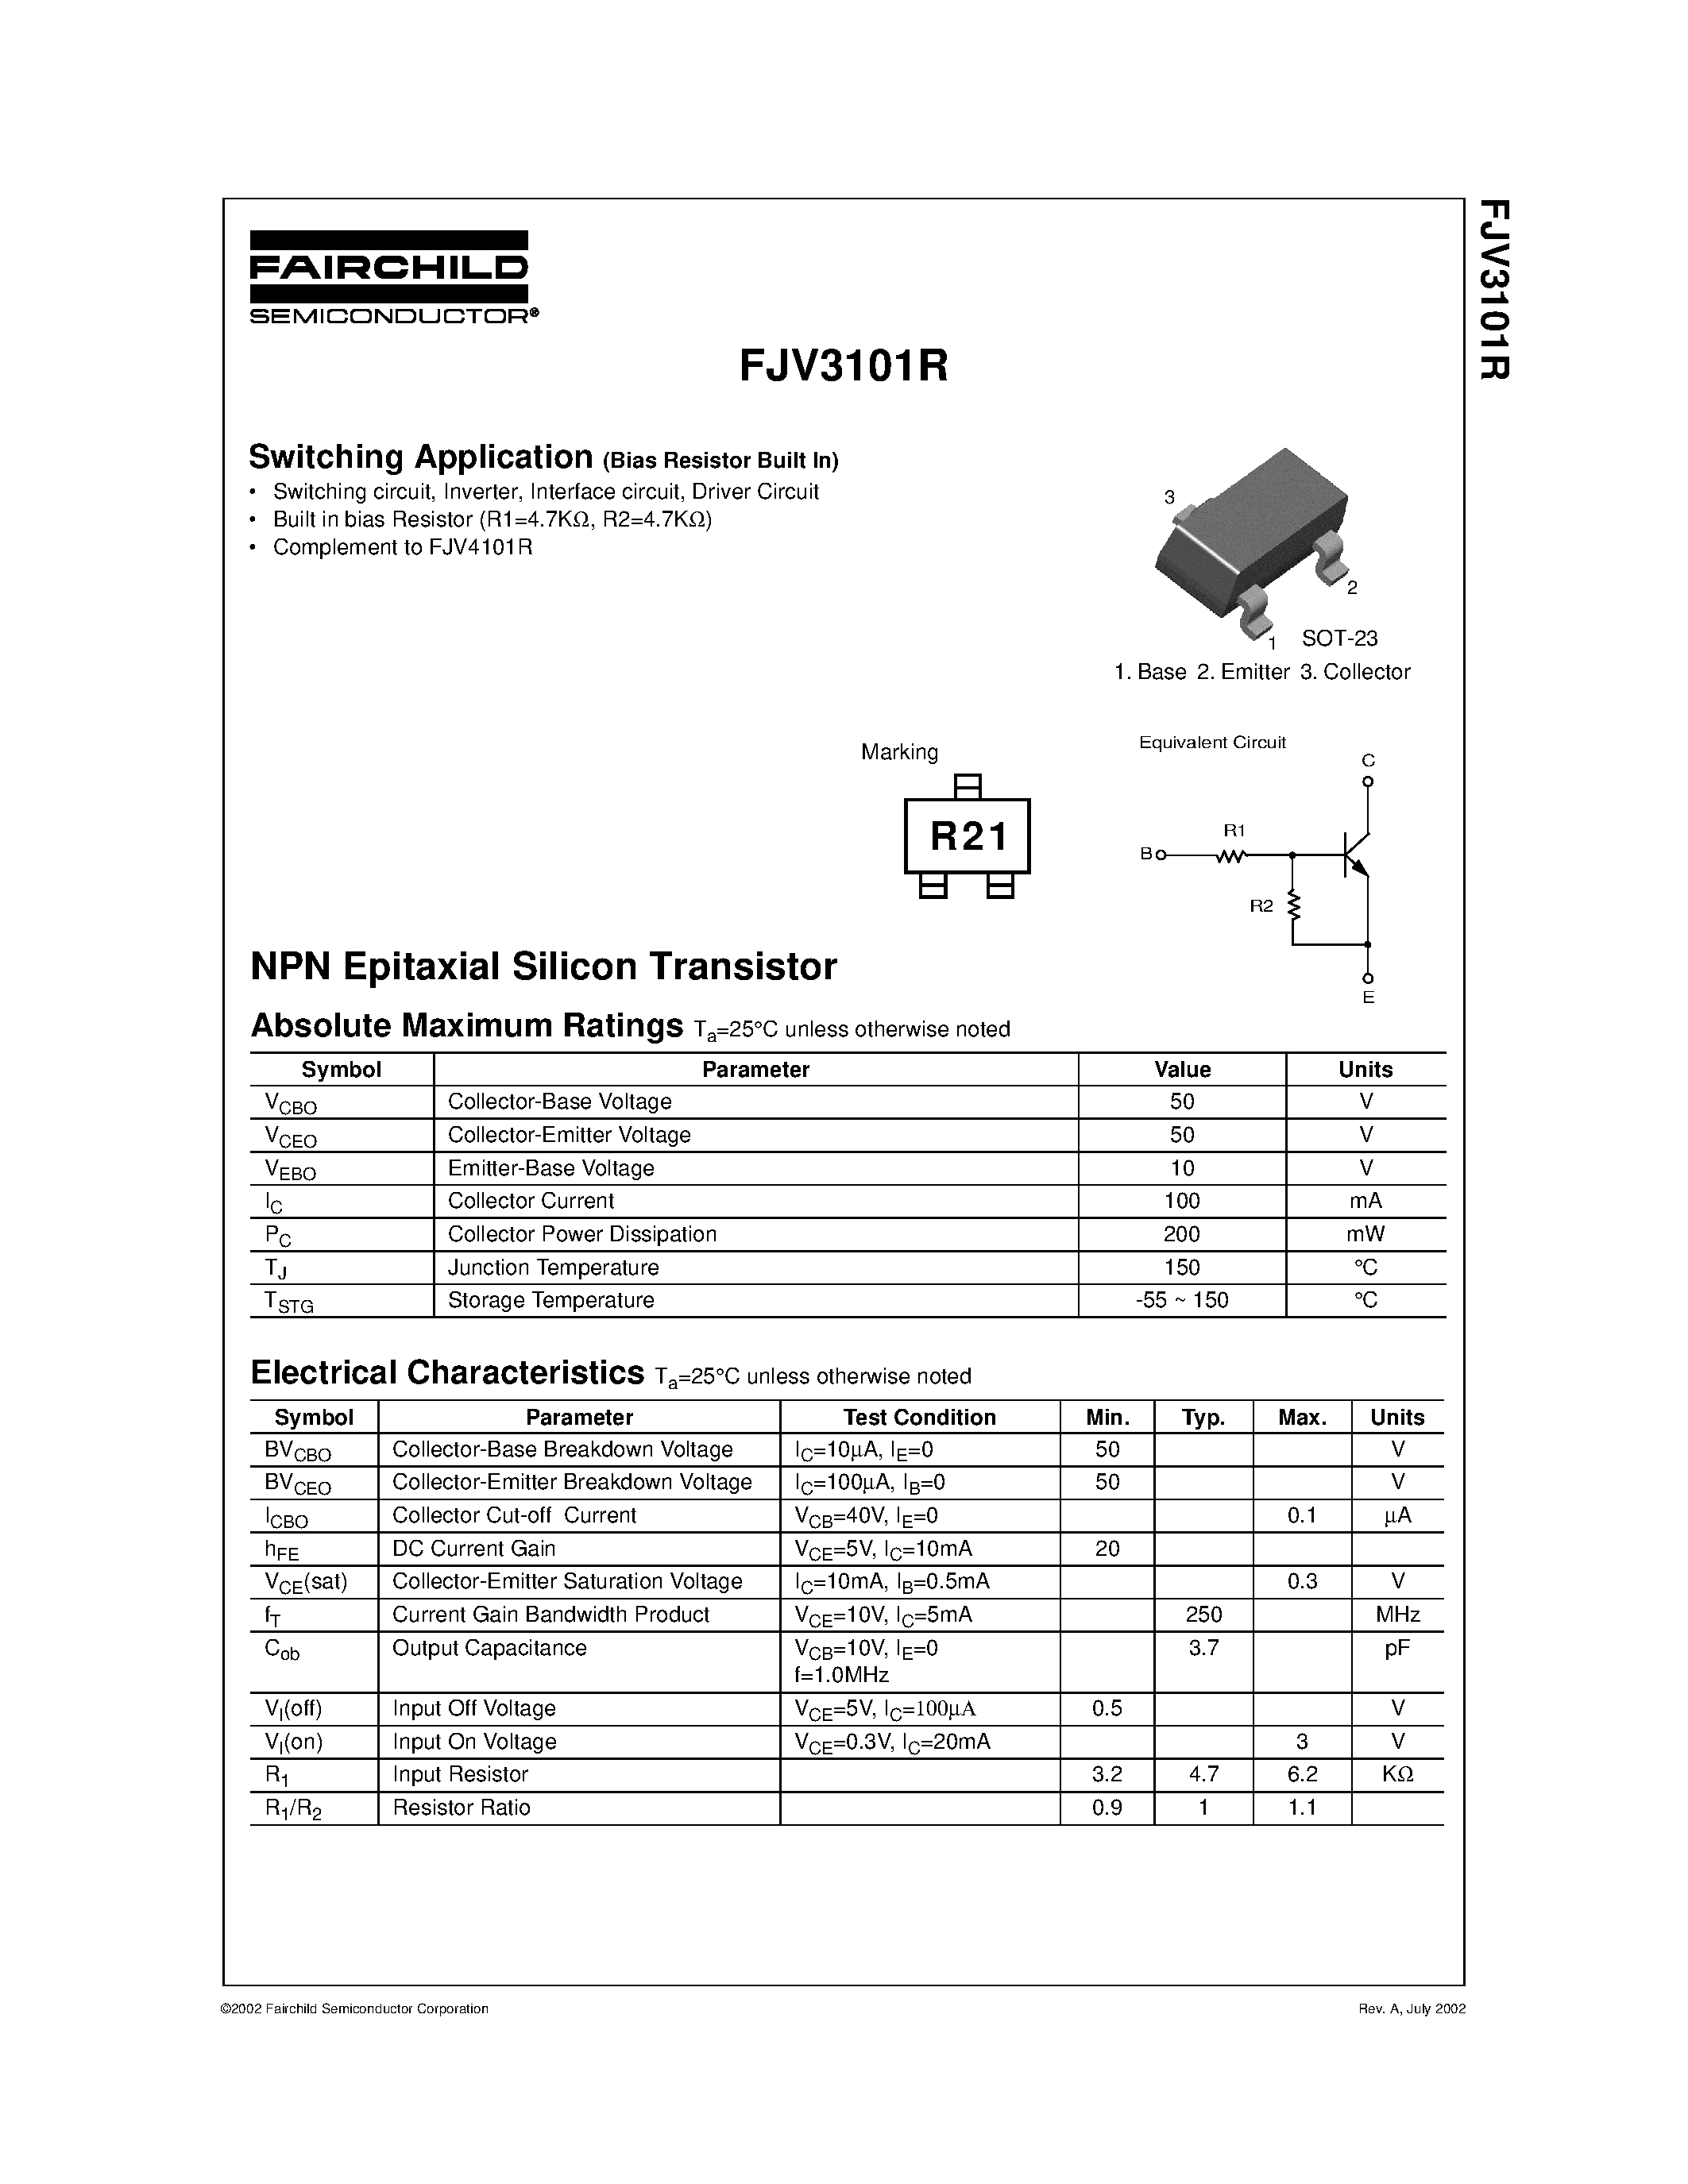 Datasheet FJV3101R - NPN Epitaxial Silicon Transistor page 1